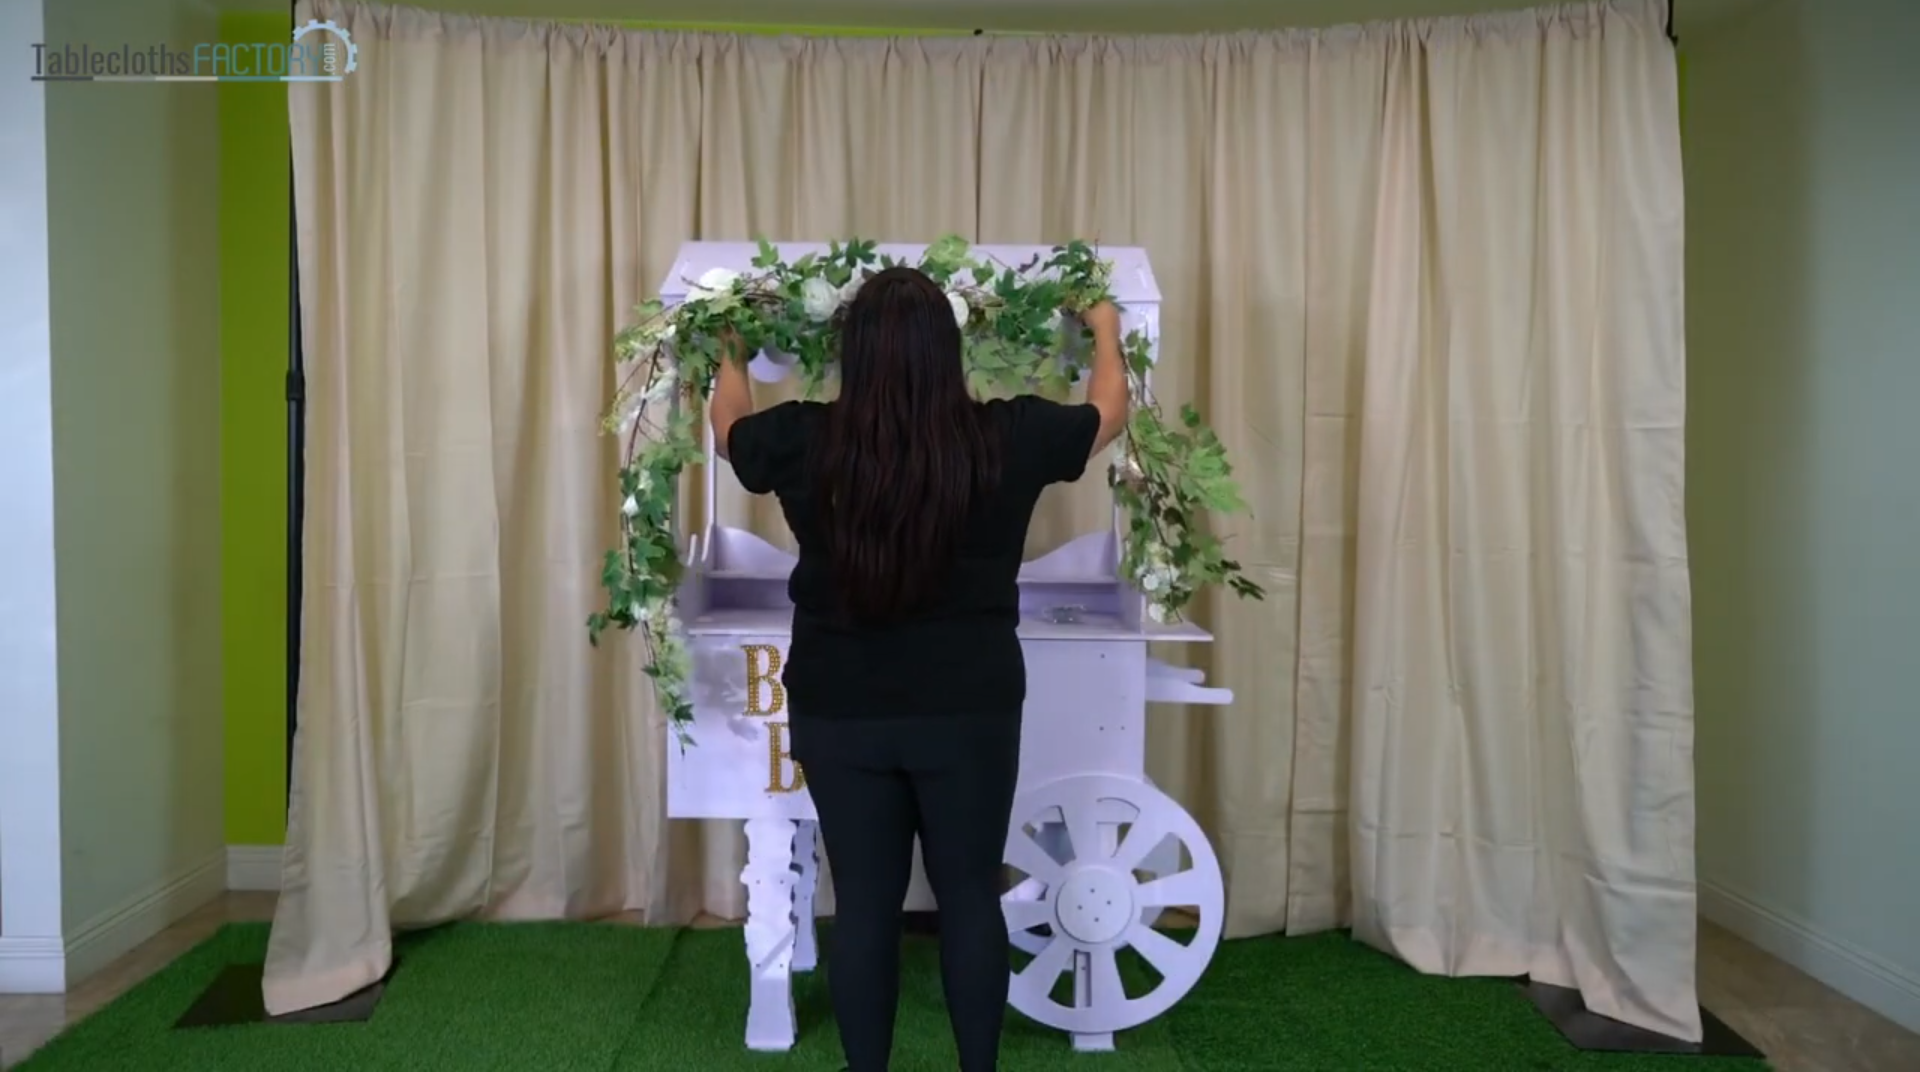 A woman arranges vines on a white cart for Mother's Day decor in a staged area.